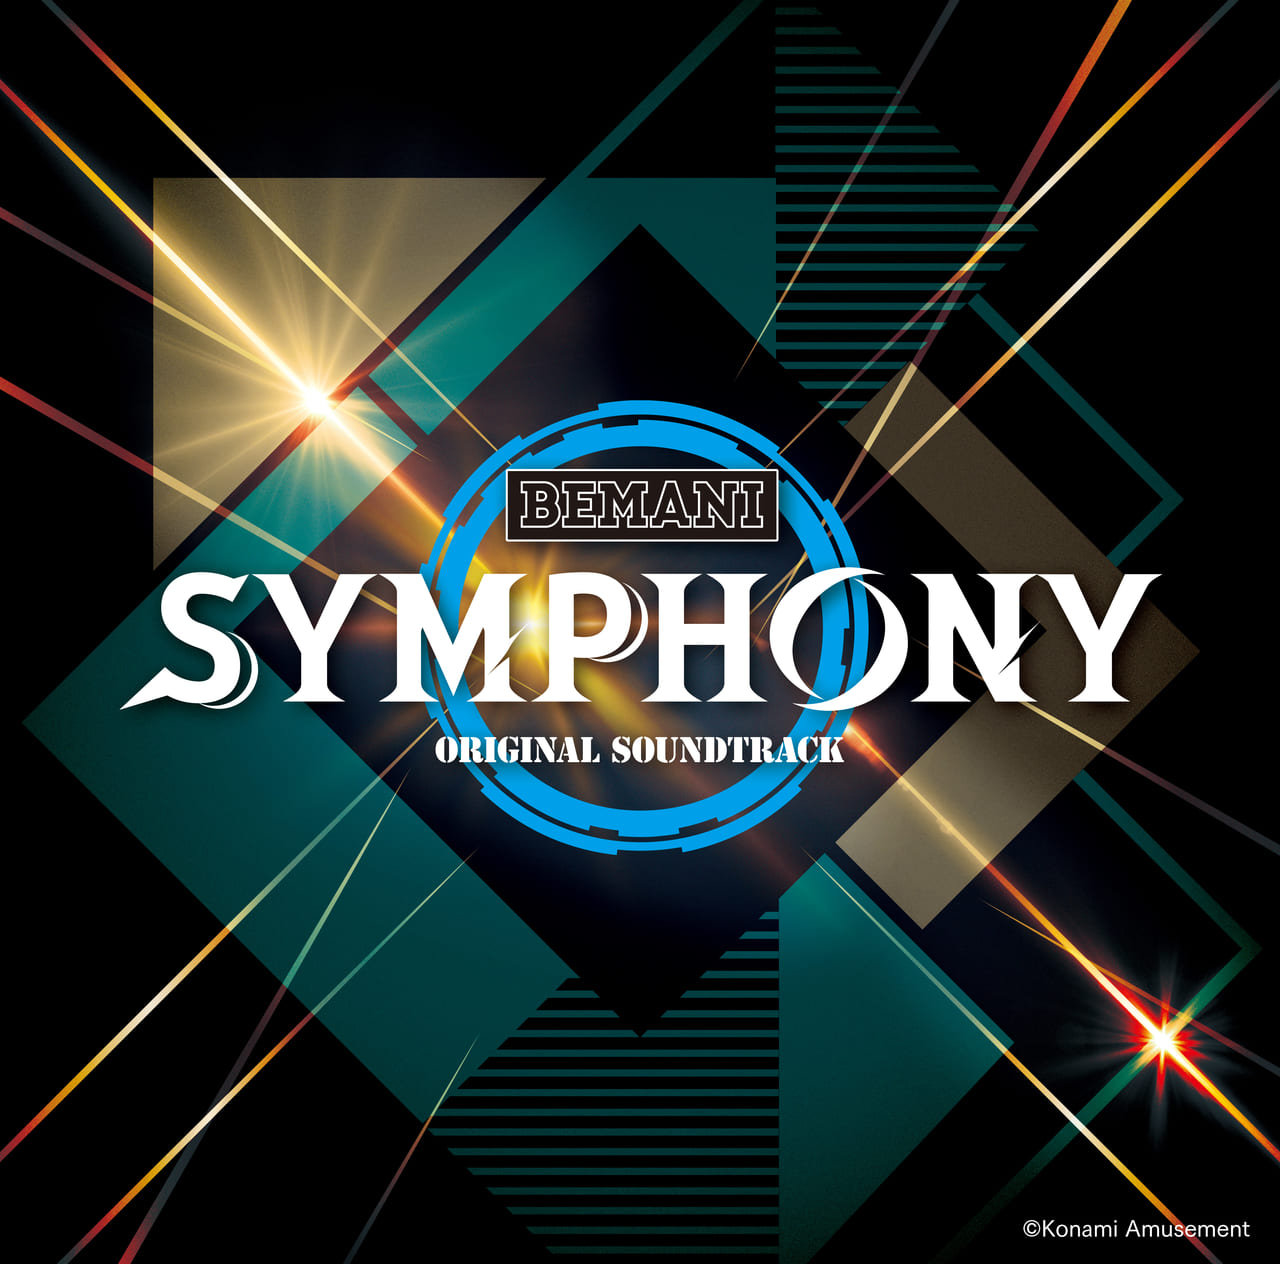 Proud to be in charge of ‘BEMANI SYMPHONY ORIGINAL SOUNDTRACK’!